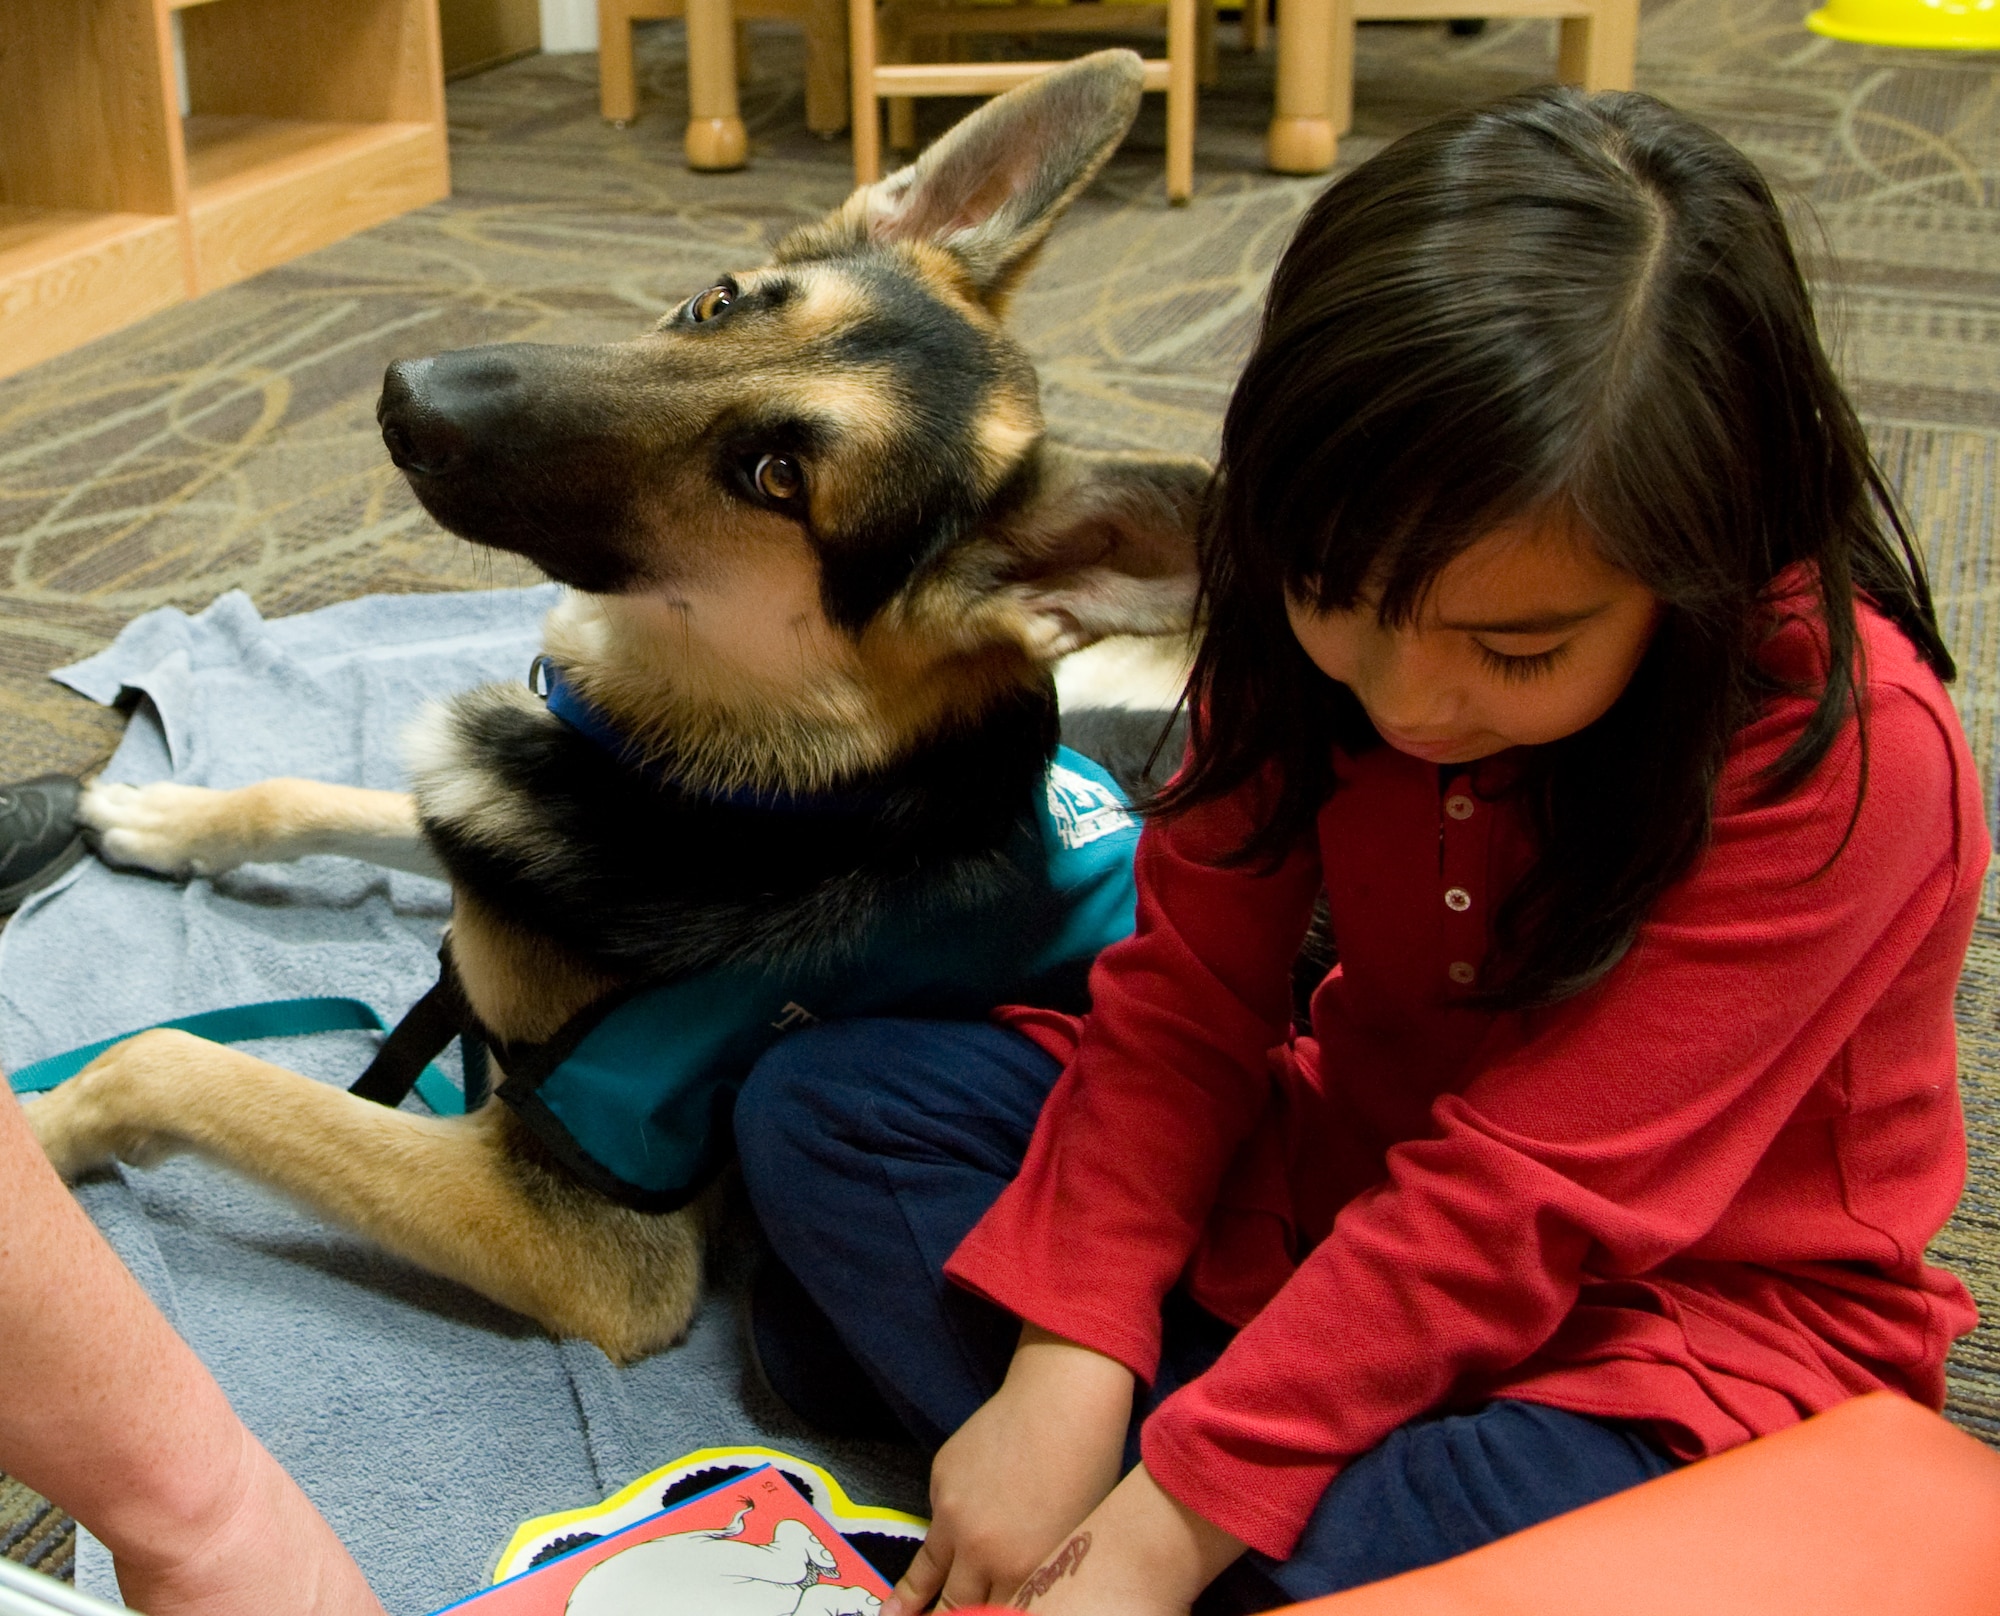 Barb Brewer, a volunteer for the Paws for Reading Program, and her dog, Toby, help Sandra Mendoza learn a new word during her reading session at the Mitchell Memorial Library, Jan. 12. The Paws for Reading program helps kids gain confidence in their reading skills. (U.S. Air Force photo/ Airman 1st Class Nicole Leidholm)